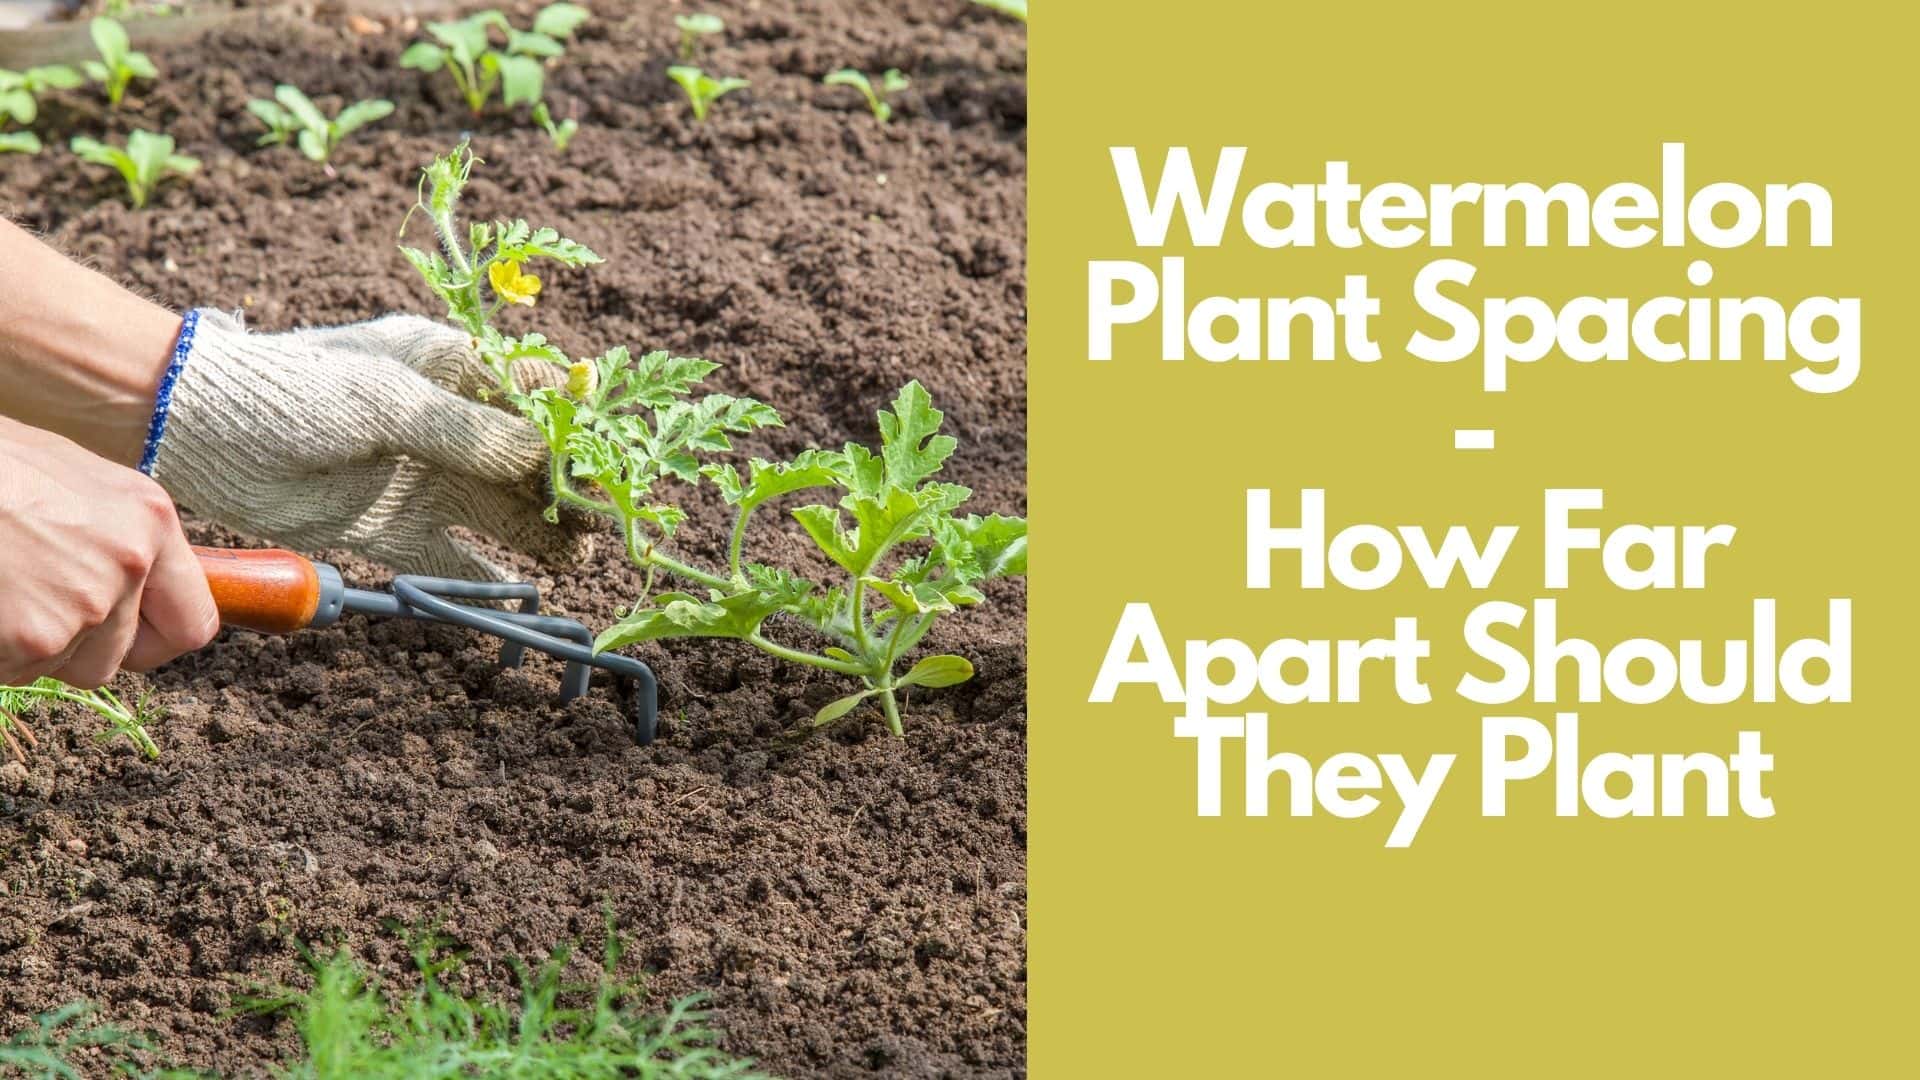 Watermelon Plant Spacing: How Far Apart Should They Plant